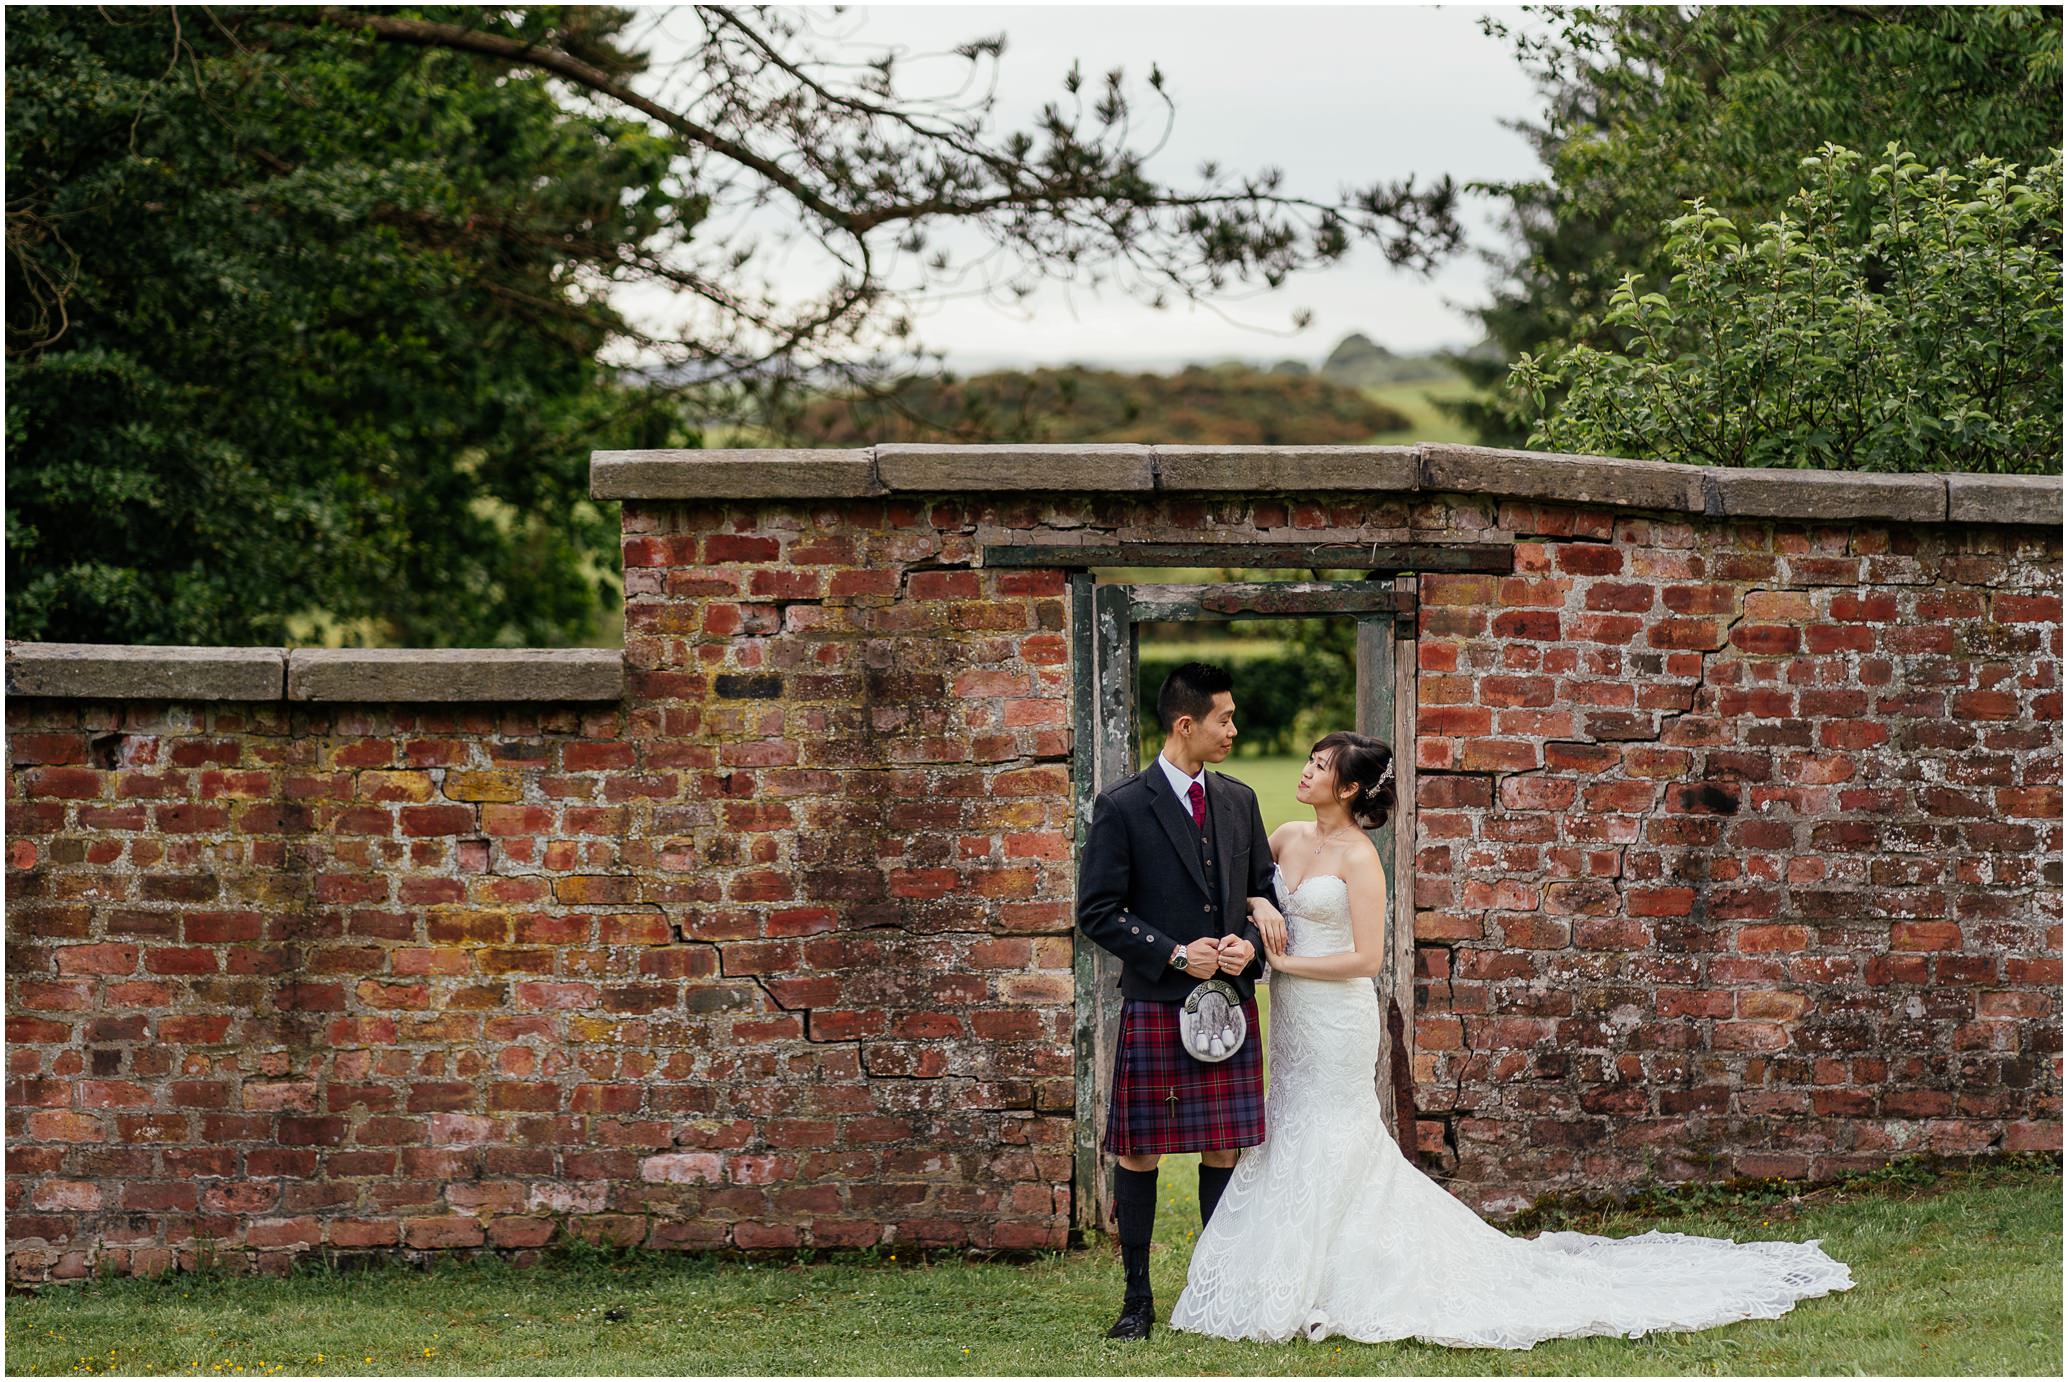 bride and groom linking arms and looking into each others eyes in walled garden with brick wall and trees behind them post wedding photoshoot glasgow fotomaki photography